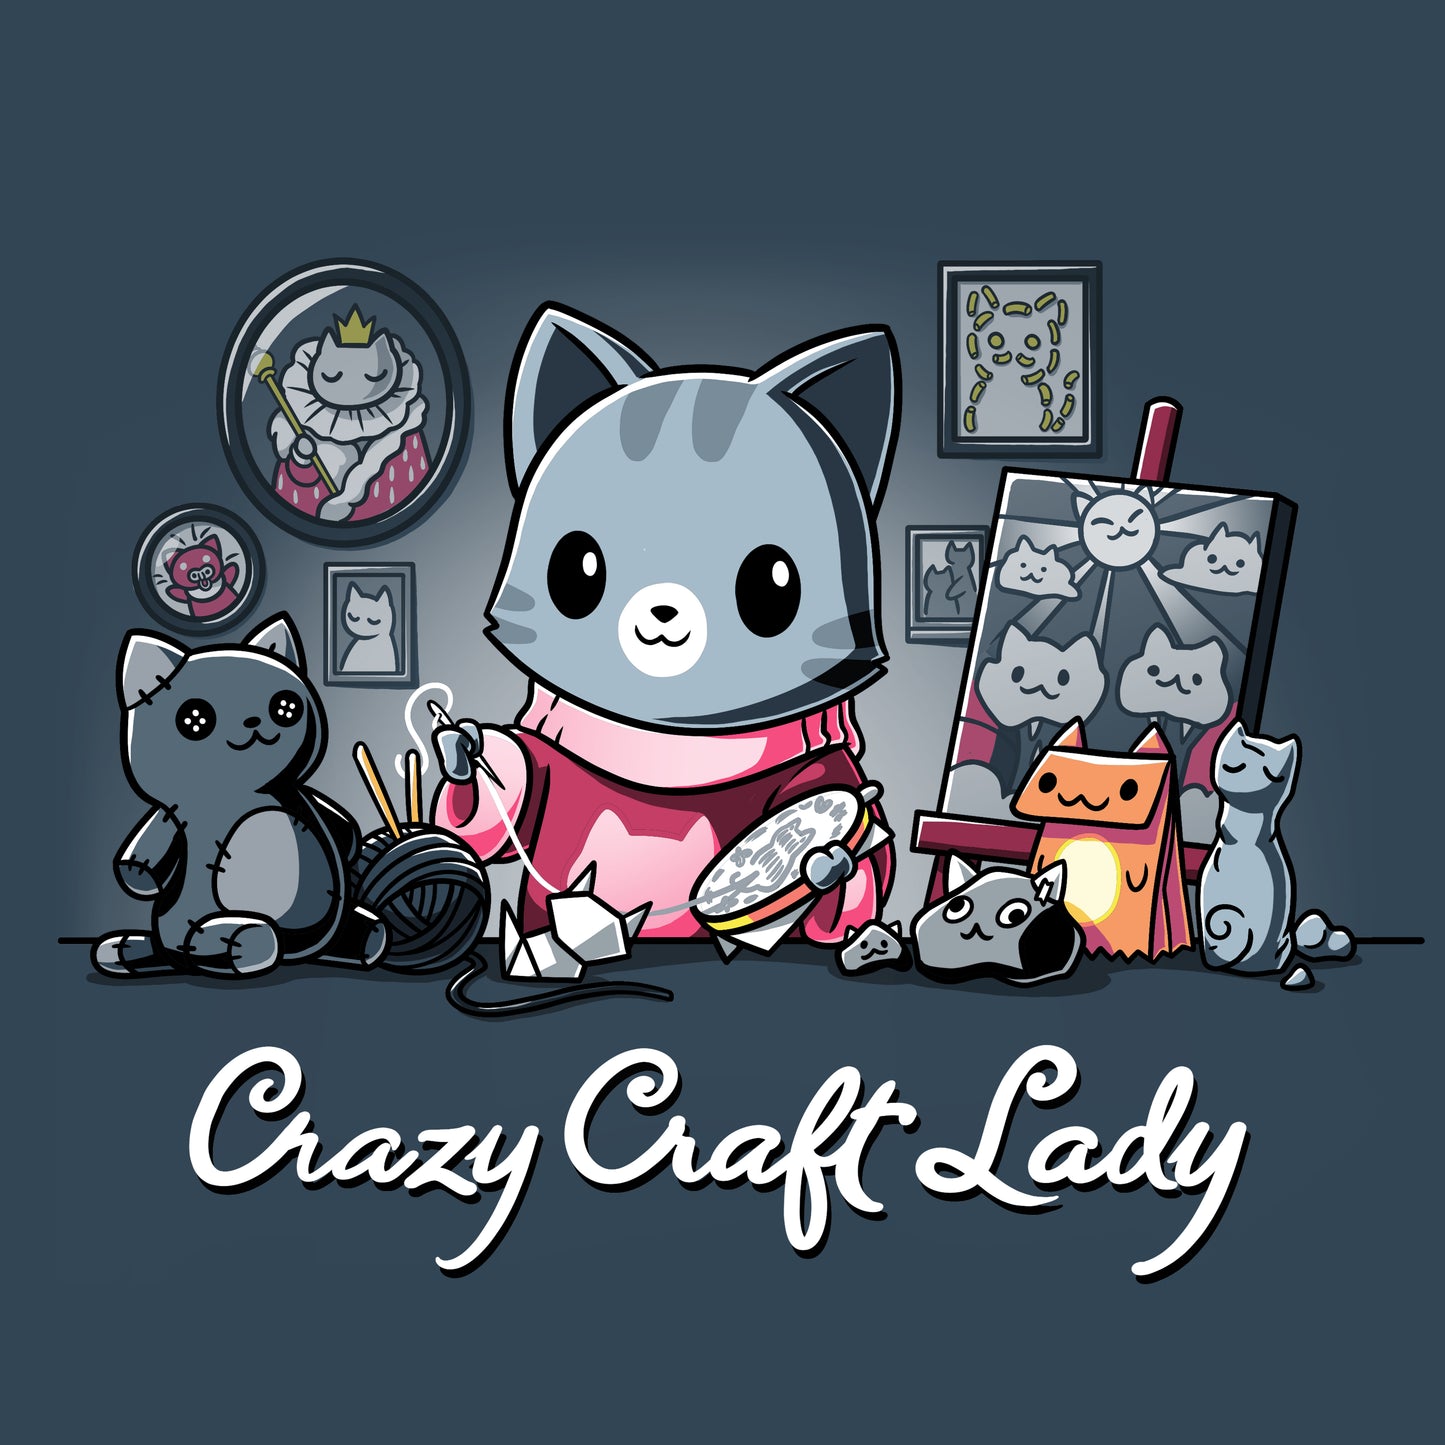 Crazy Craft Lady Denim blue t-shirt for craft enthusiasts by TeeTurtle.